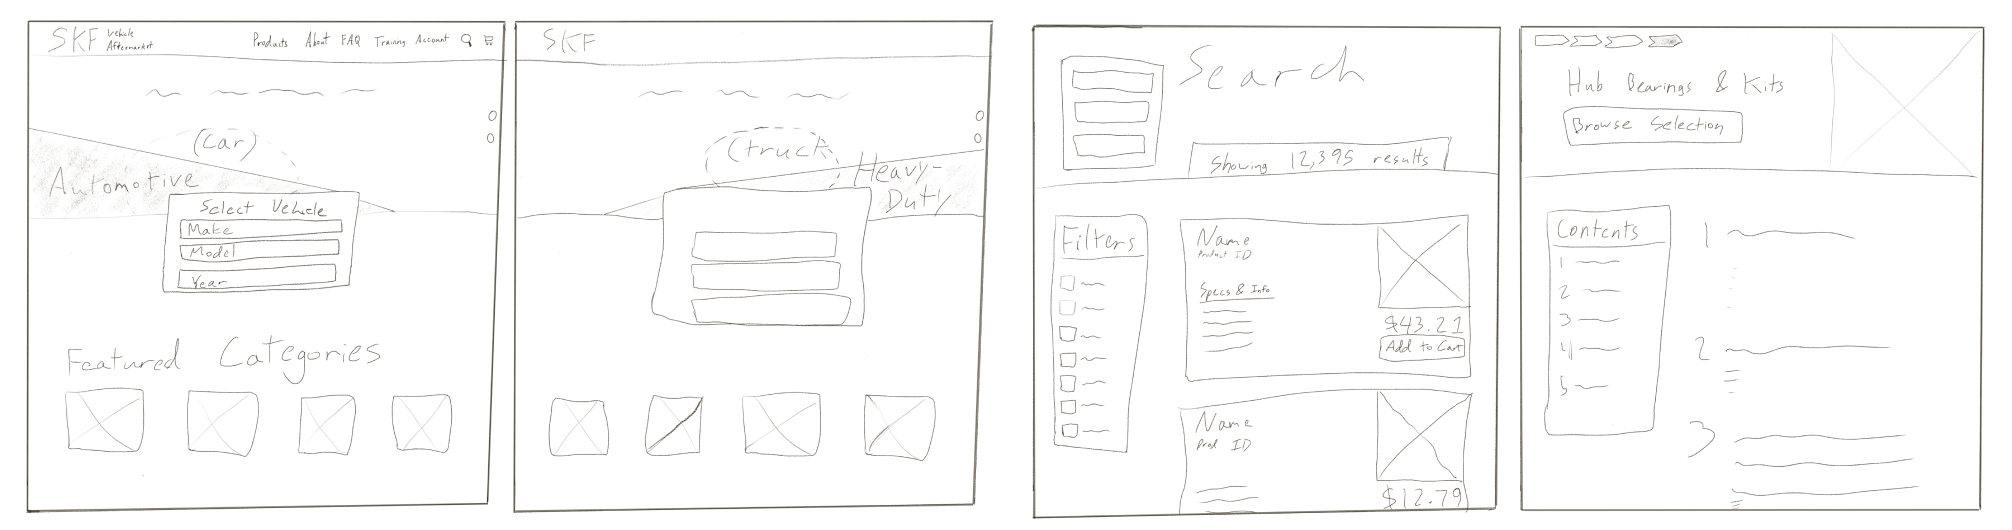 Sample of early UI sketches